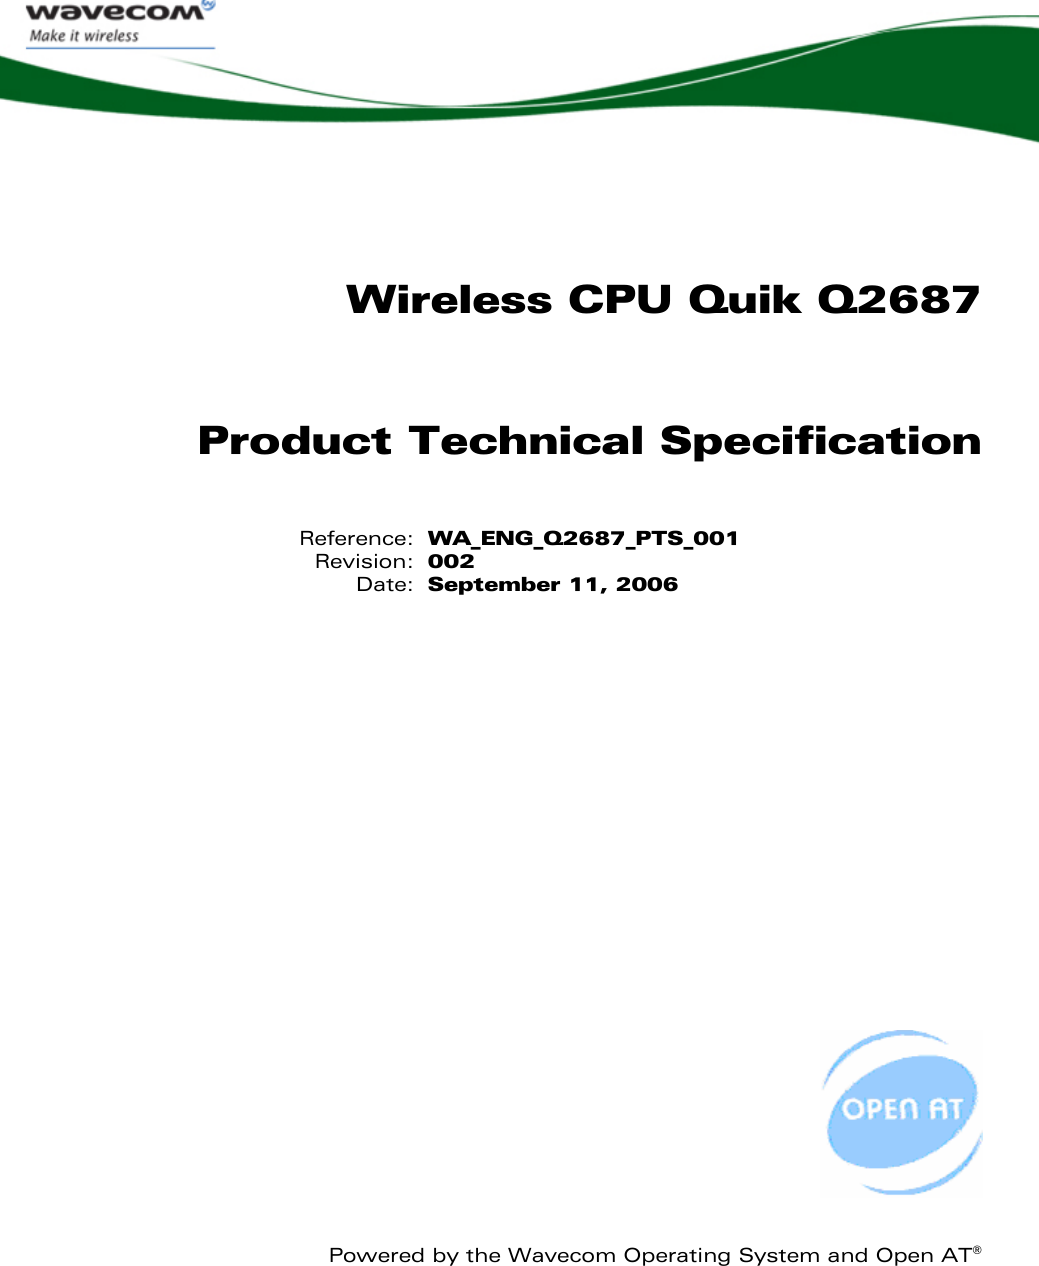   Wireless CPU Quik Q2687 Product Technical Specification   Reference:  WA_ENG_Q2687_PTS_001  Revision:  002 Date:  September 11, 2006                Powered by the Wavecom Operating System and Open AT® 